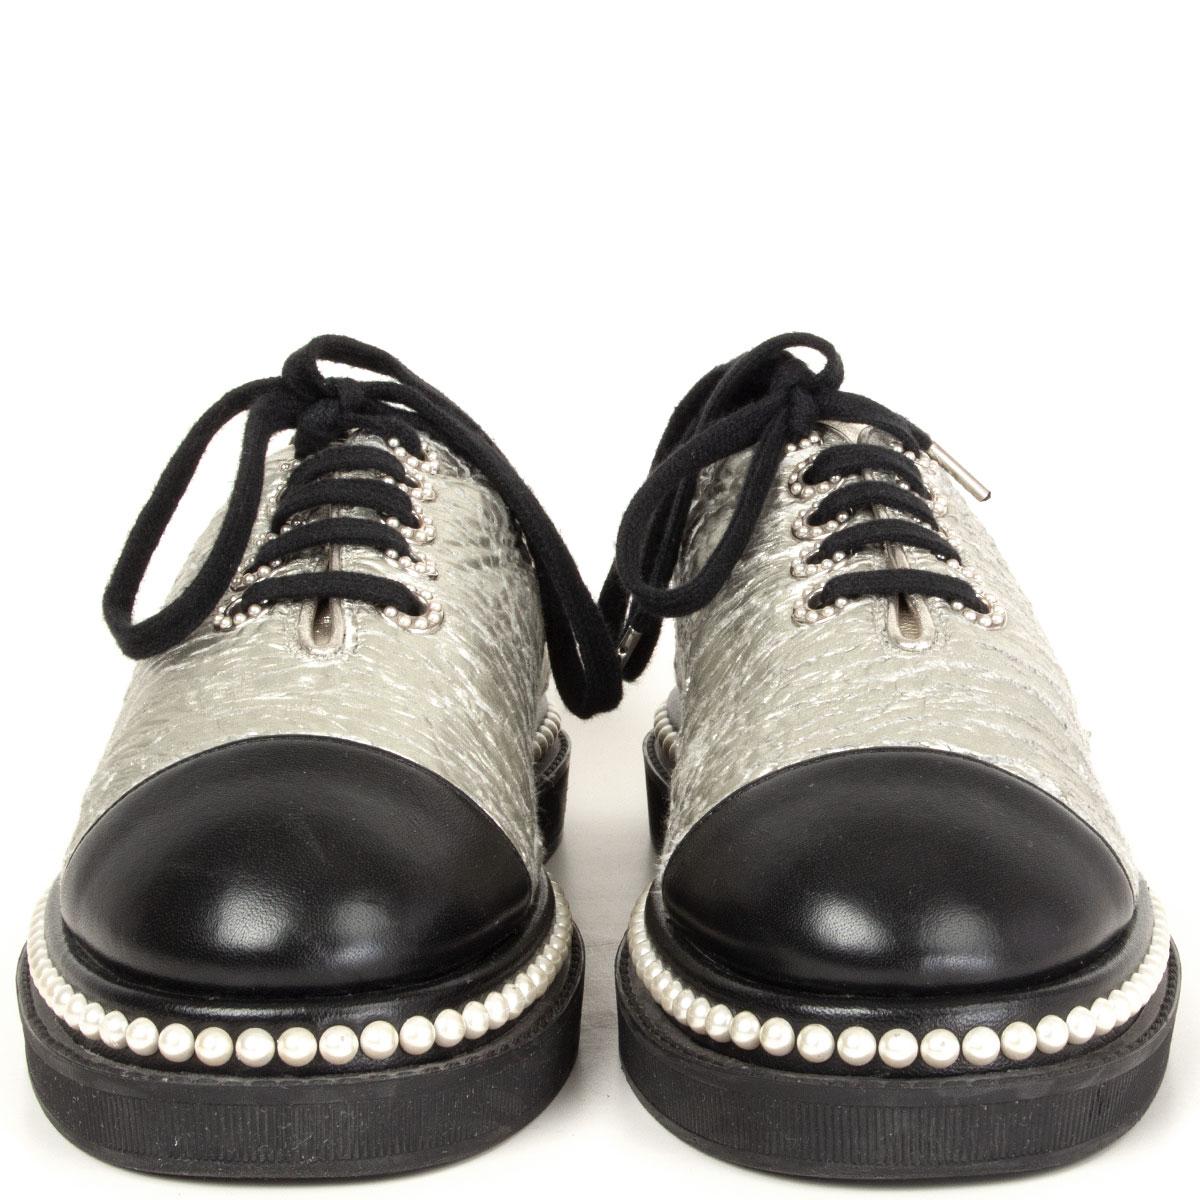 100% authentic Chanel dress shoes in warm silver and black smooth lambskin. Heel with CC logo pearl embellishment and eyelets. They flaunt faux pearl trim on the midsoles and come equipped with leather lined insoles and solid rubber soles. Have been